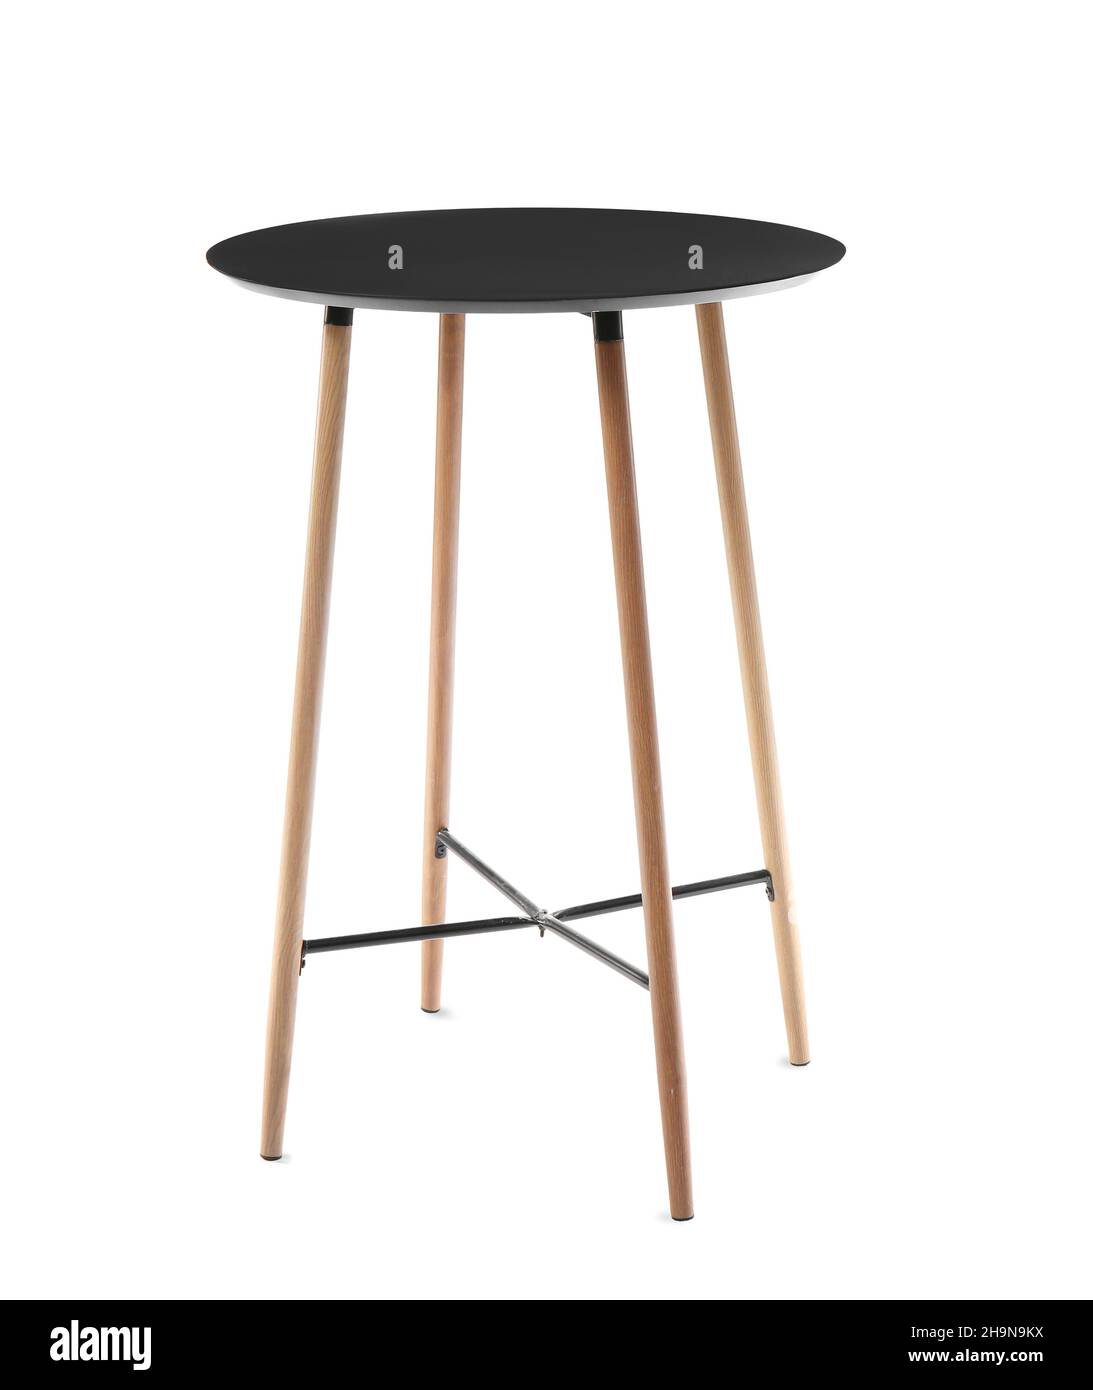 Stand-up table on white background Stock Photo